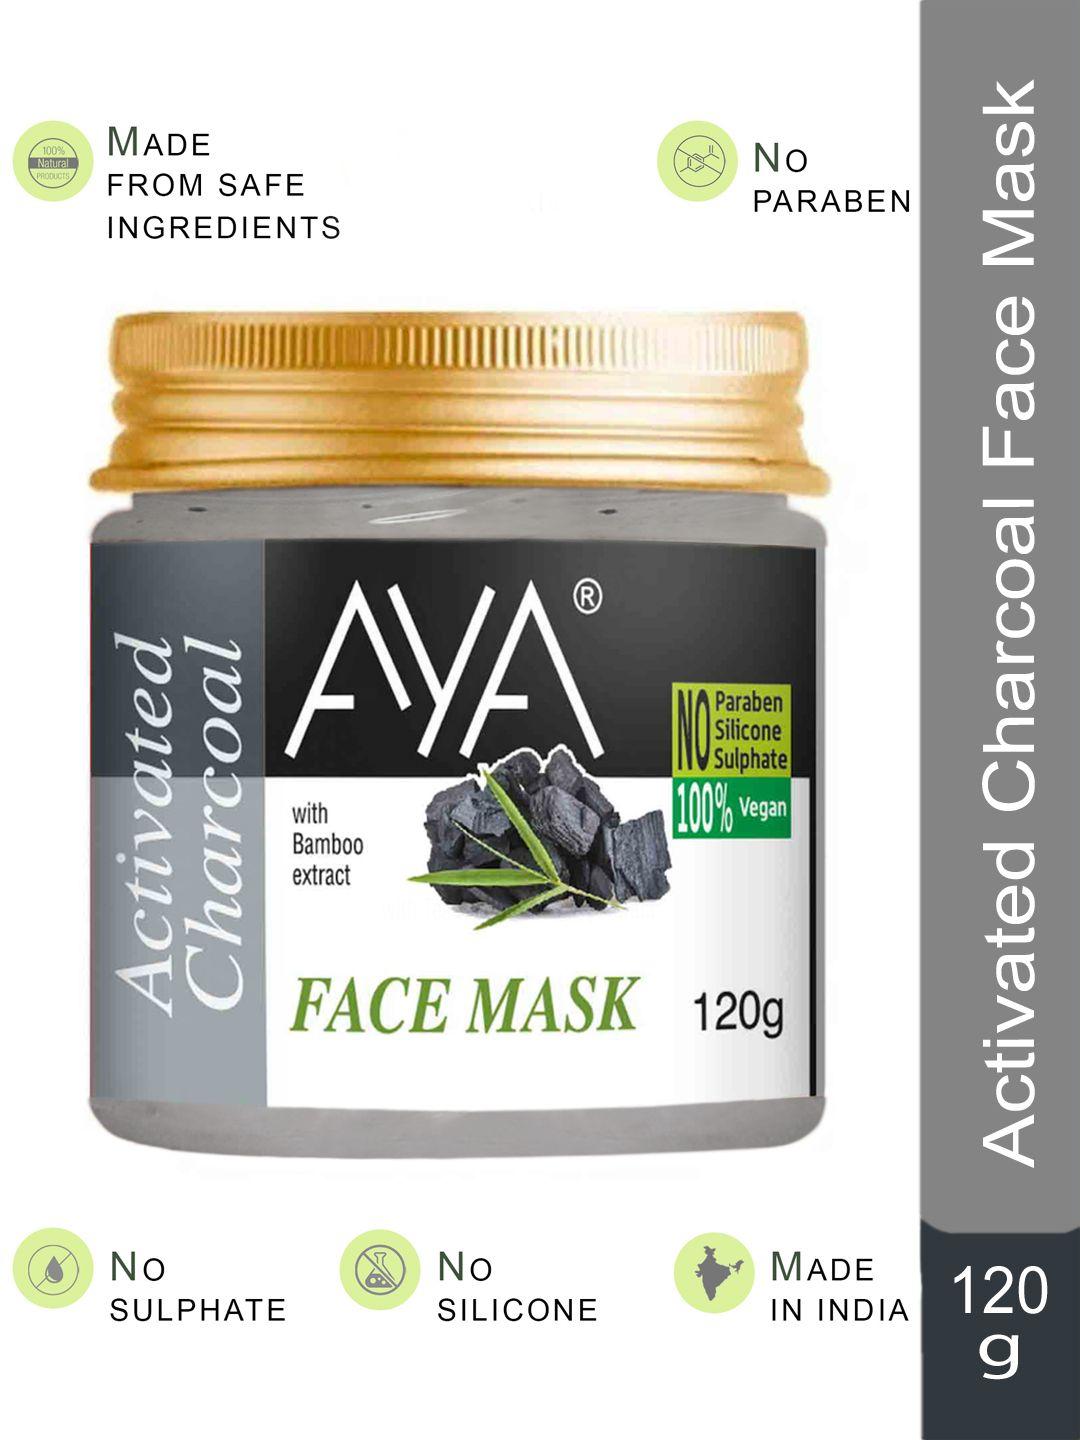 aya paraben-free & silicone-free activated charcoal face mask with bamboo extract - 120g